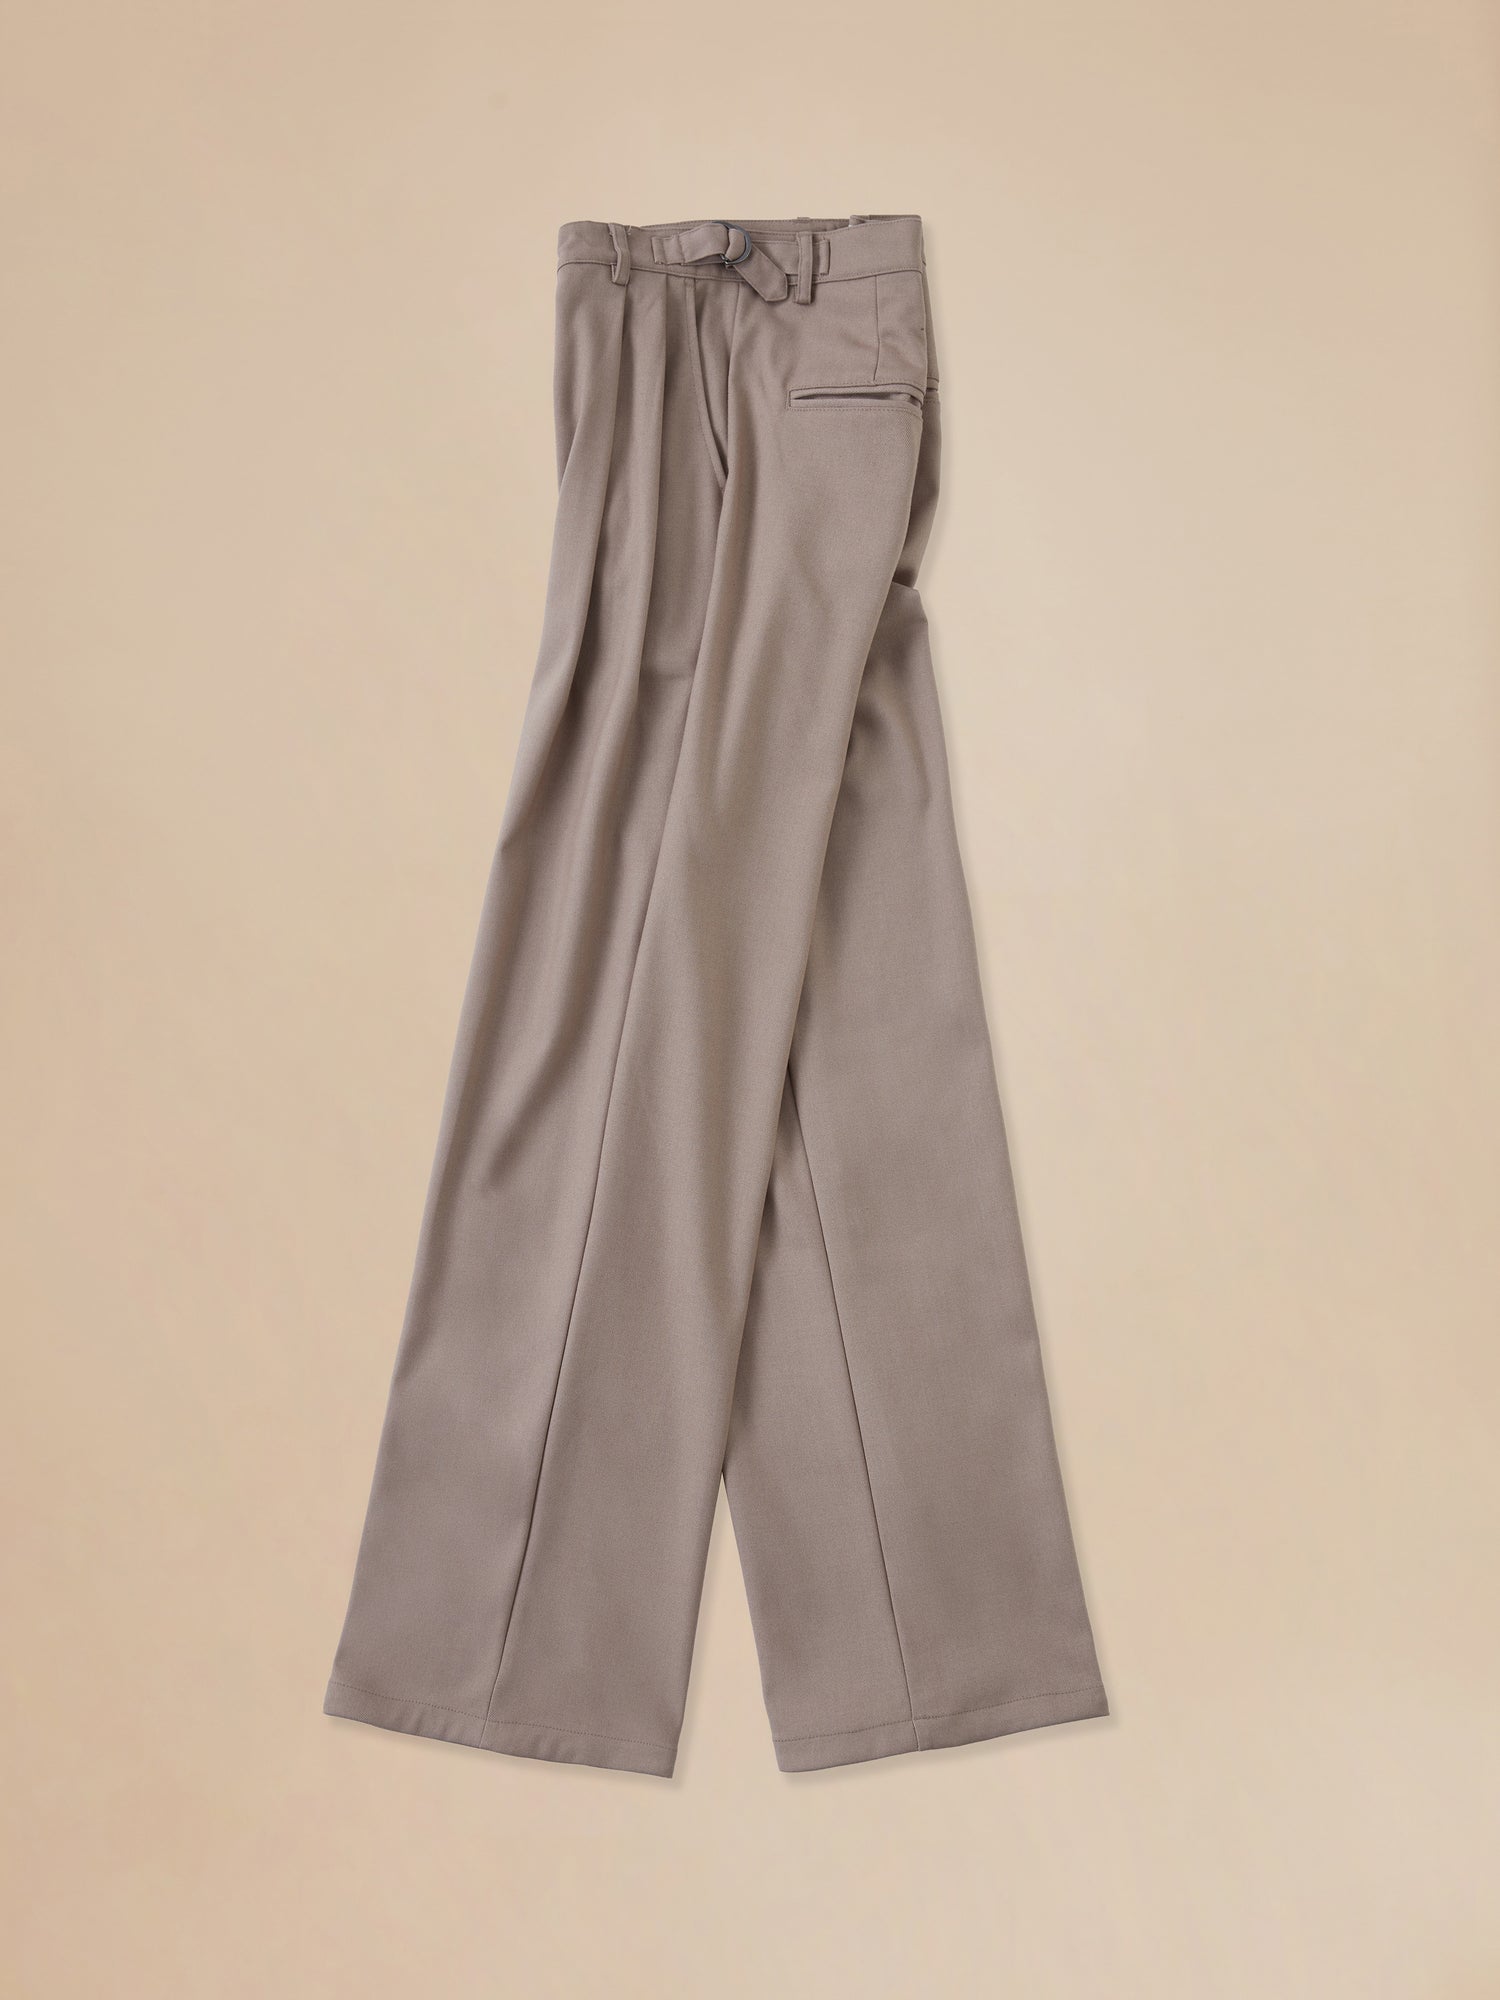 A pair of Found Pleated Trousers in beige on a beige background.